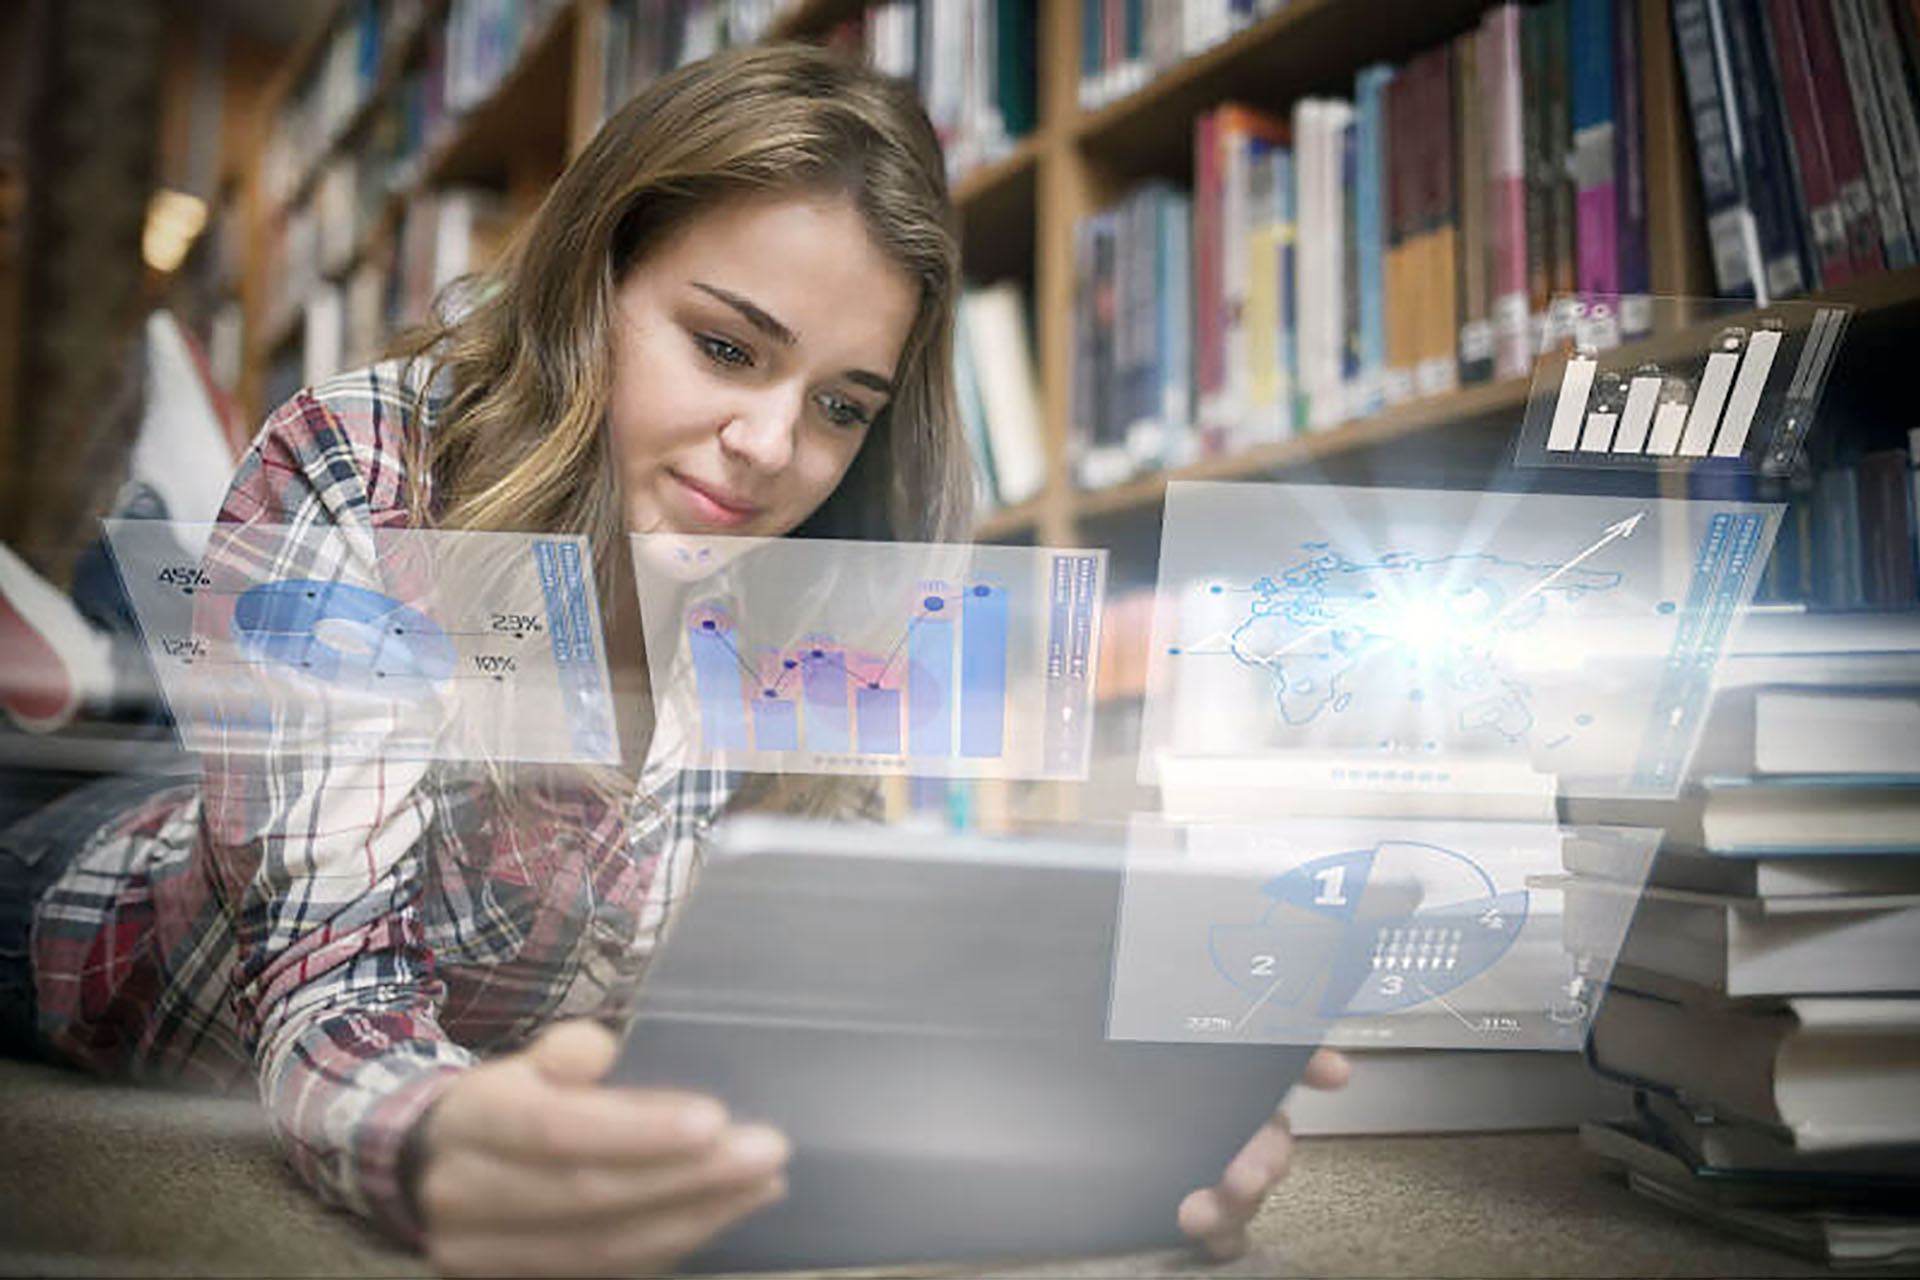 Student looking at laptop in library